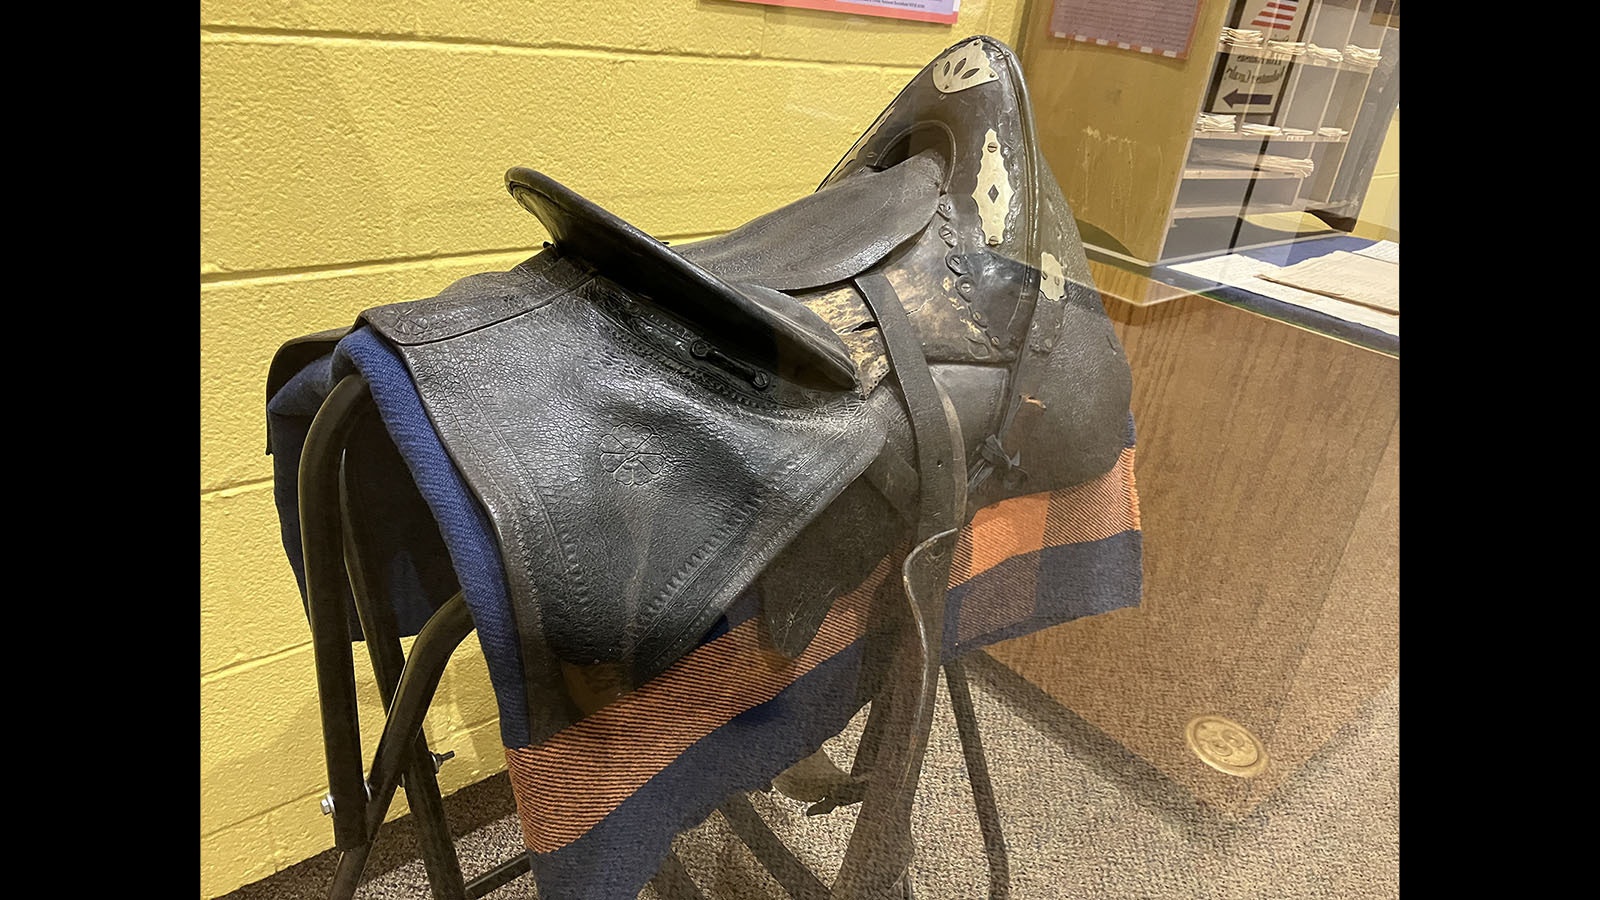 Saddle used by Preston Plumb and obtained by Johanna Wickman for exhibit at Fort Caspar Museum.